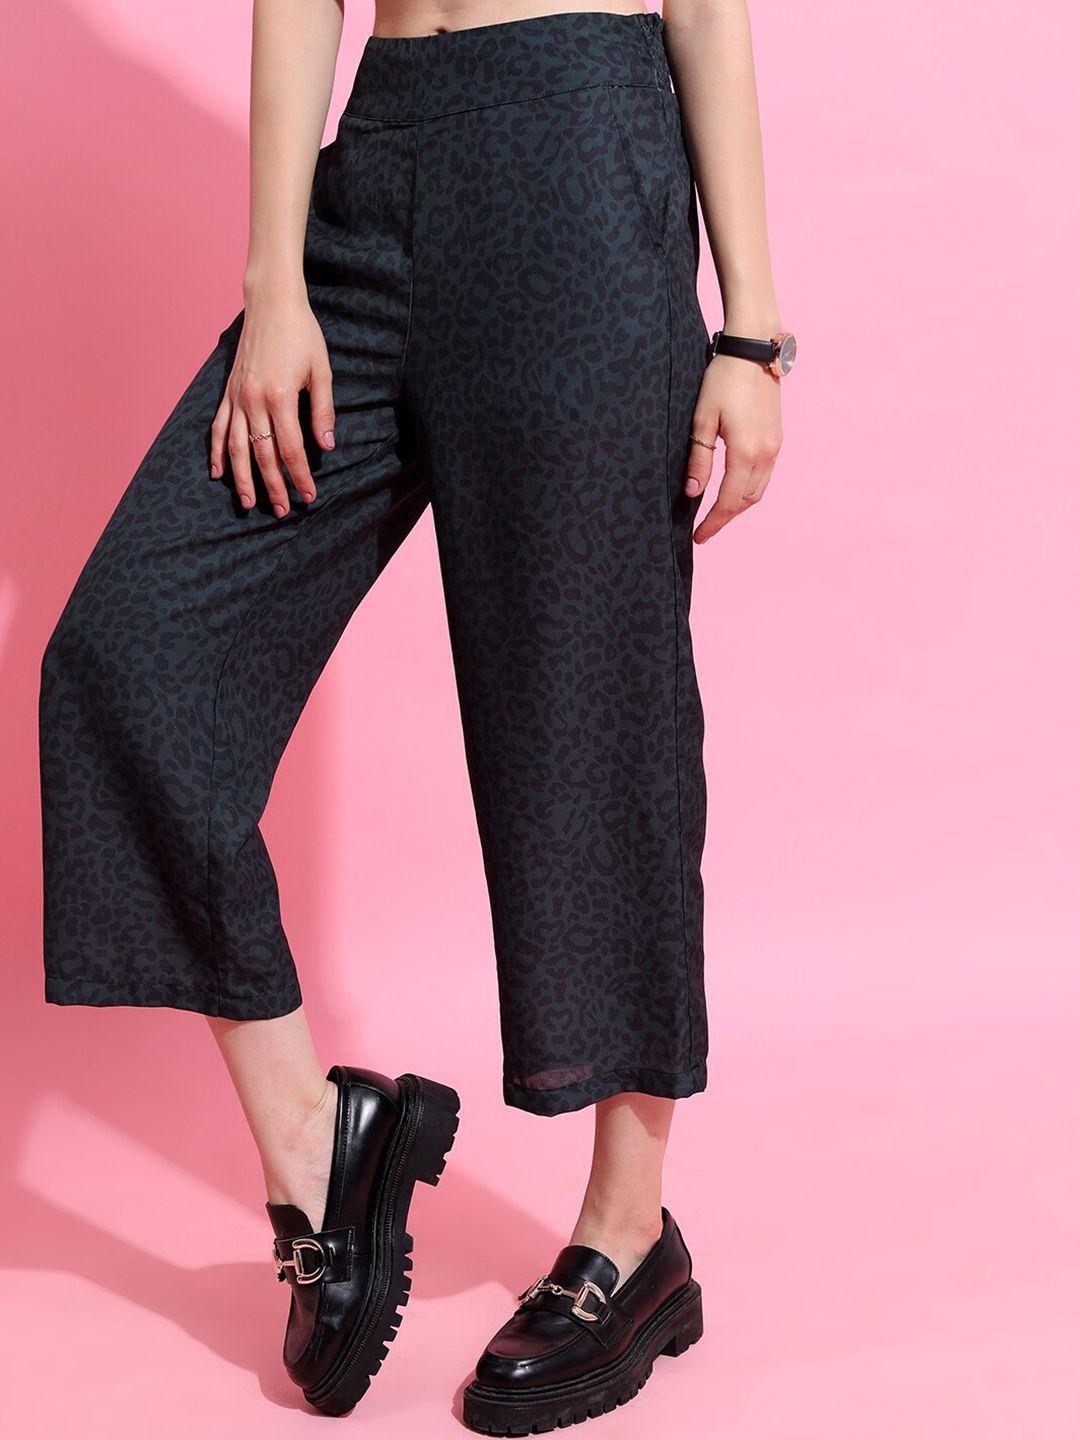 tokyo talkies green & black animal printed mid-raise flat front culottes trousers